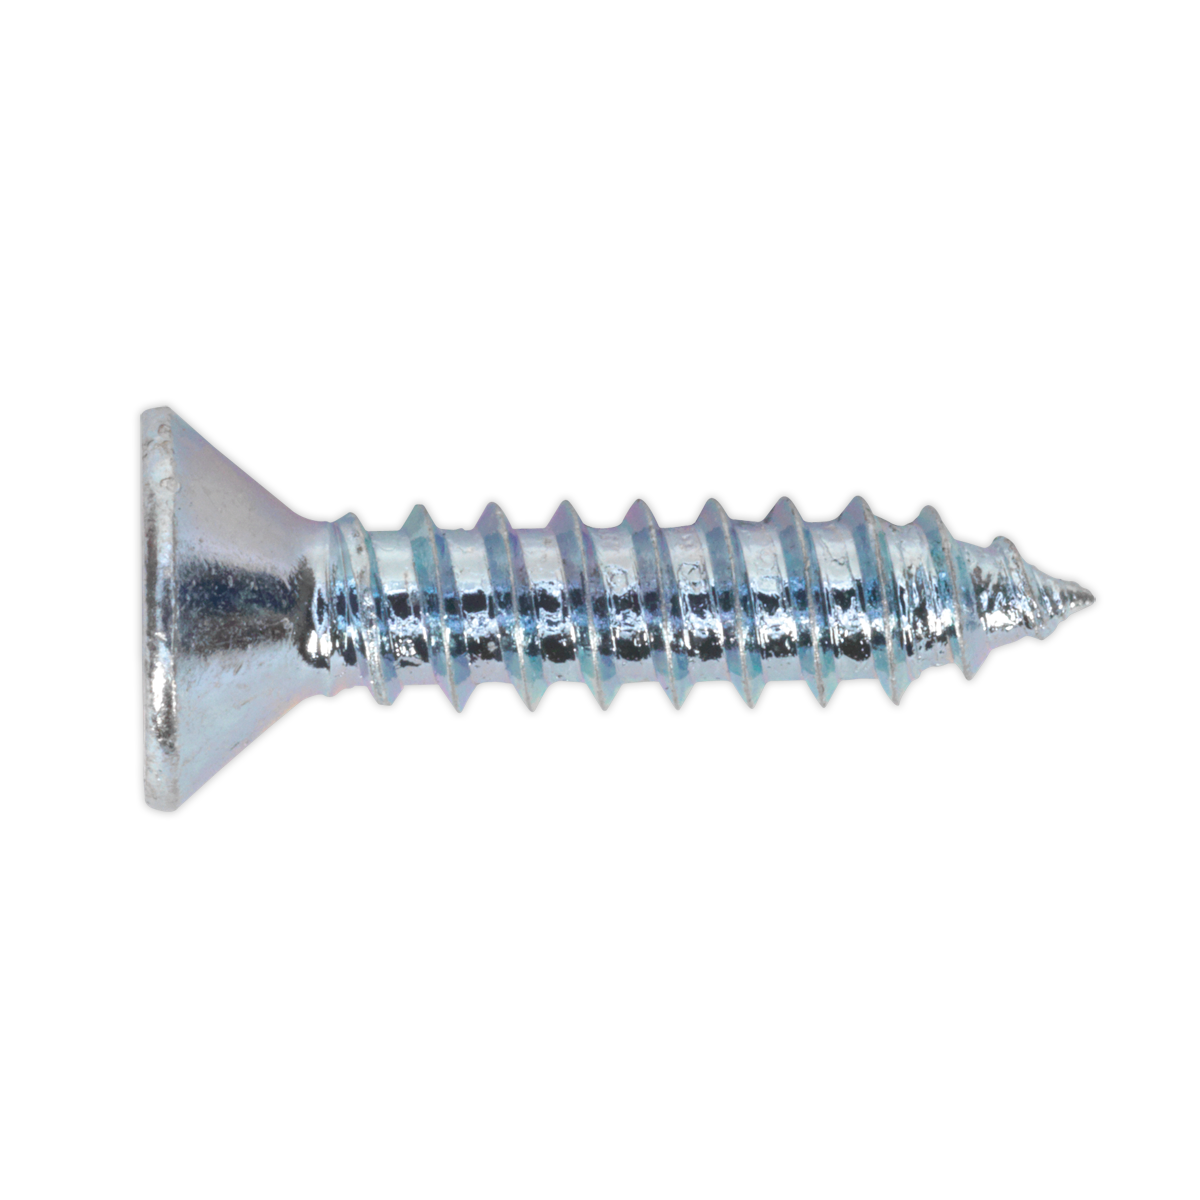 Self Tapping Screw 4.2 x 19mm Countersunk Pozi Pack of 100 - ST4219 - Farming Parts